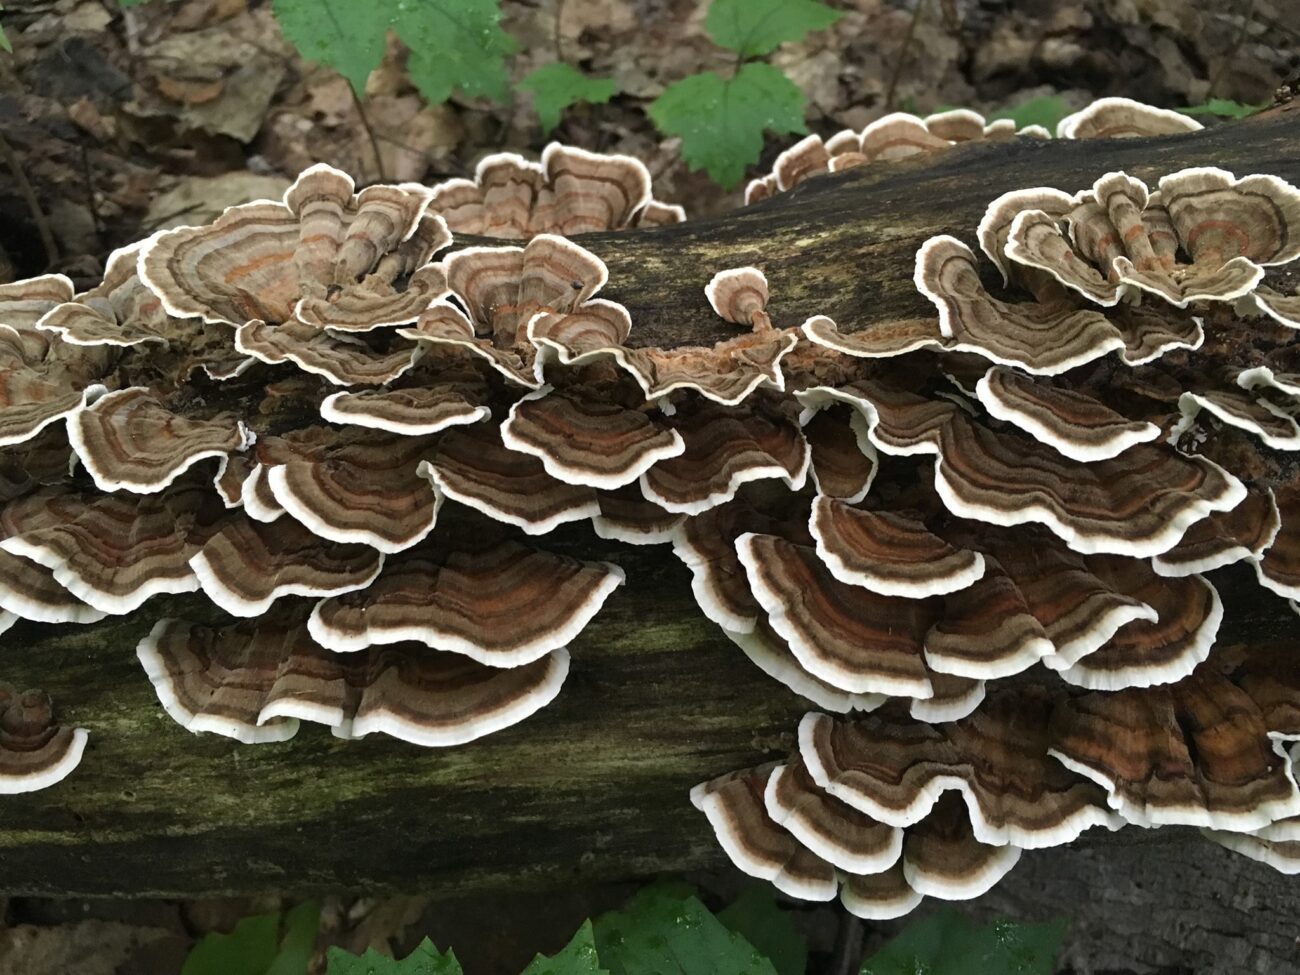 Did you know that turkey tail mushrooms might have some medicinal benefits hidden within them? Discover the amazing secrets of these mushrooms today.